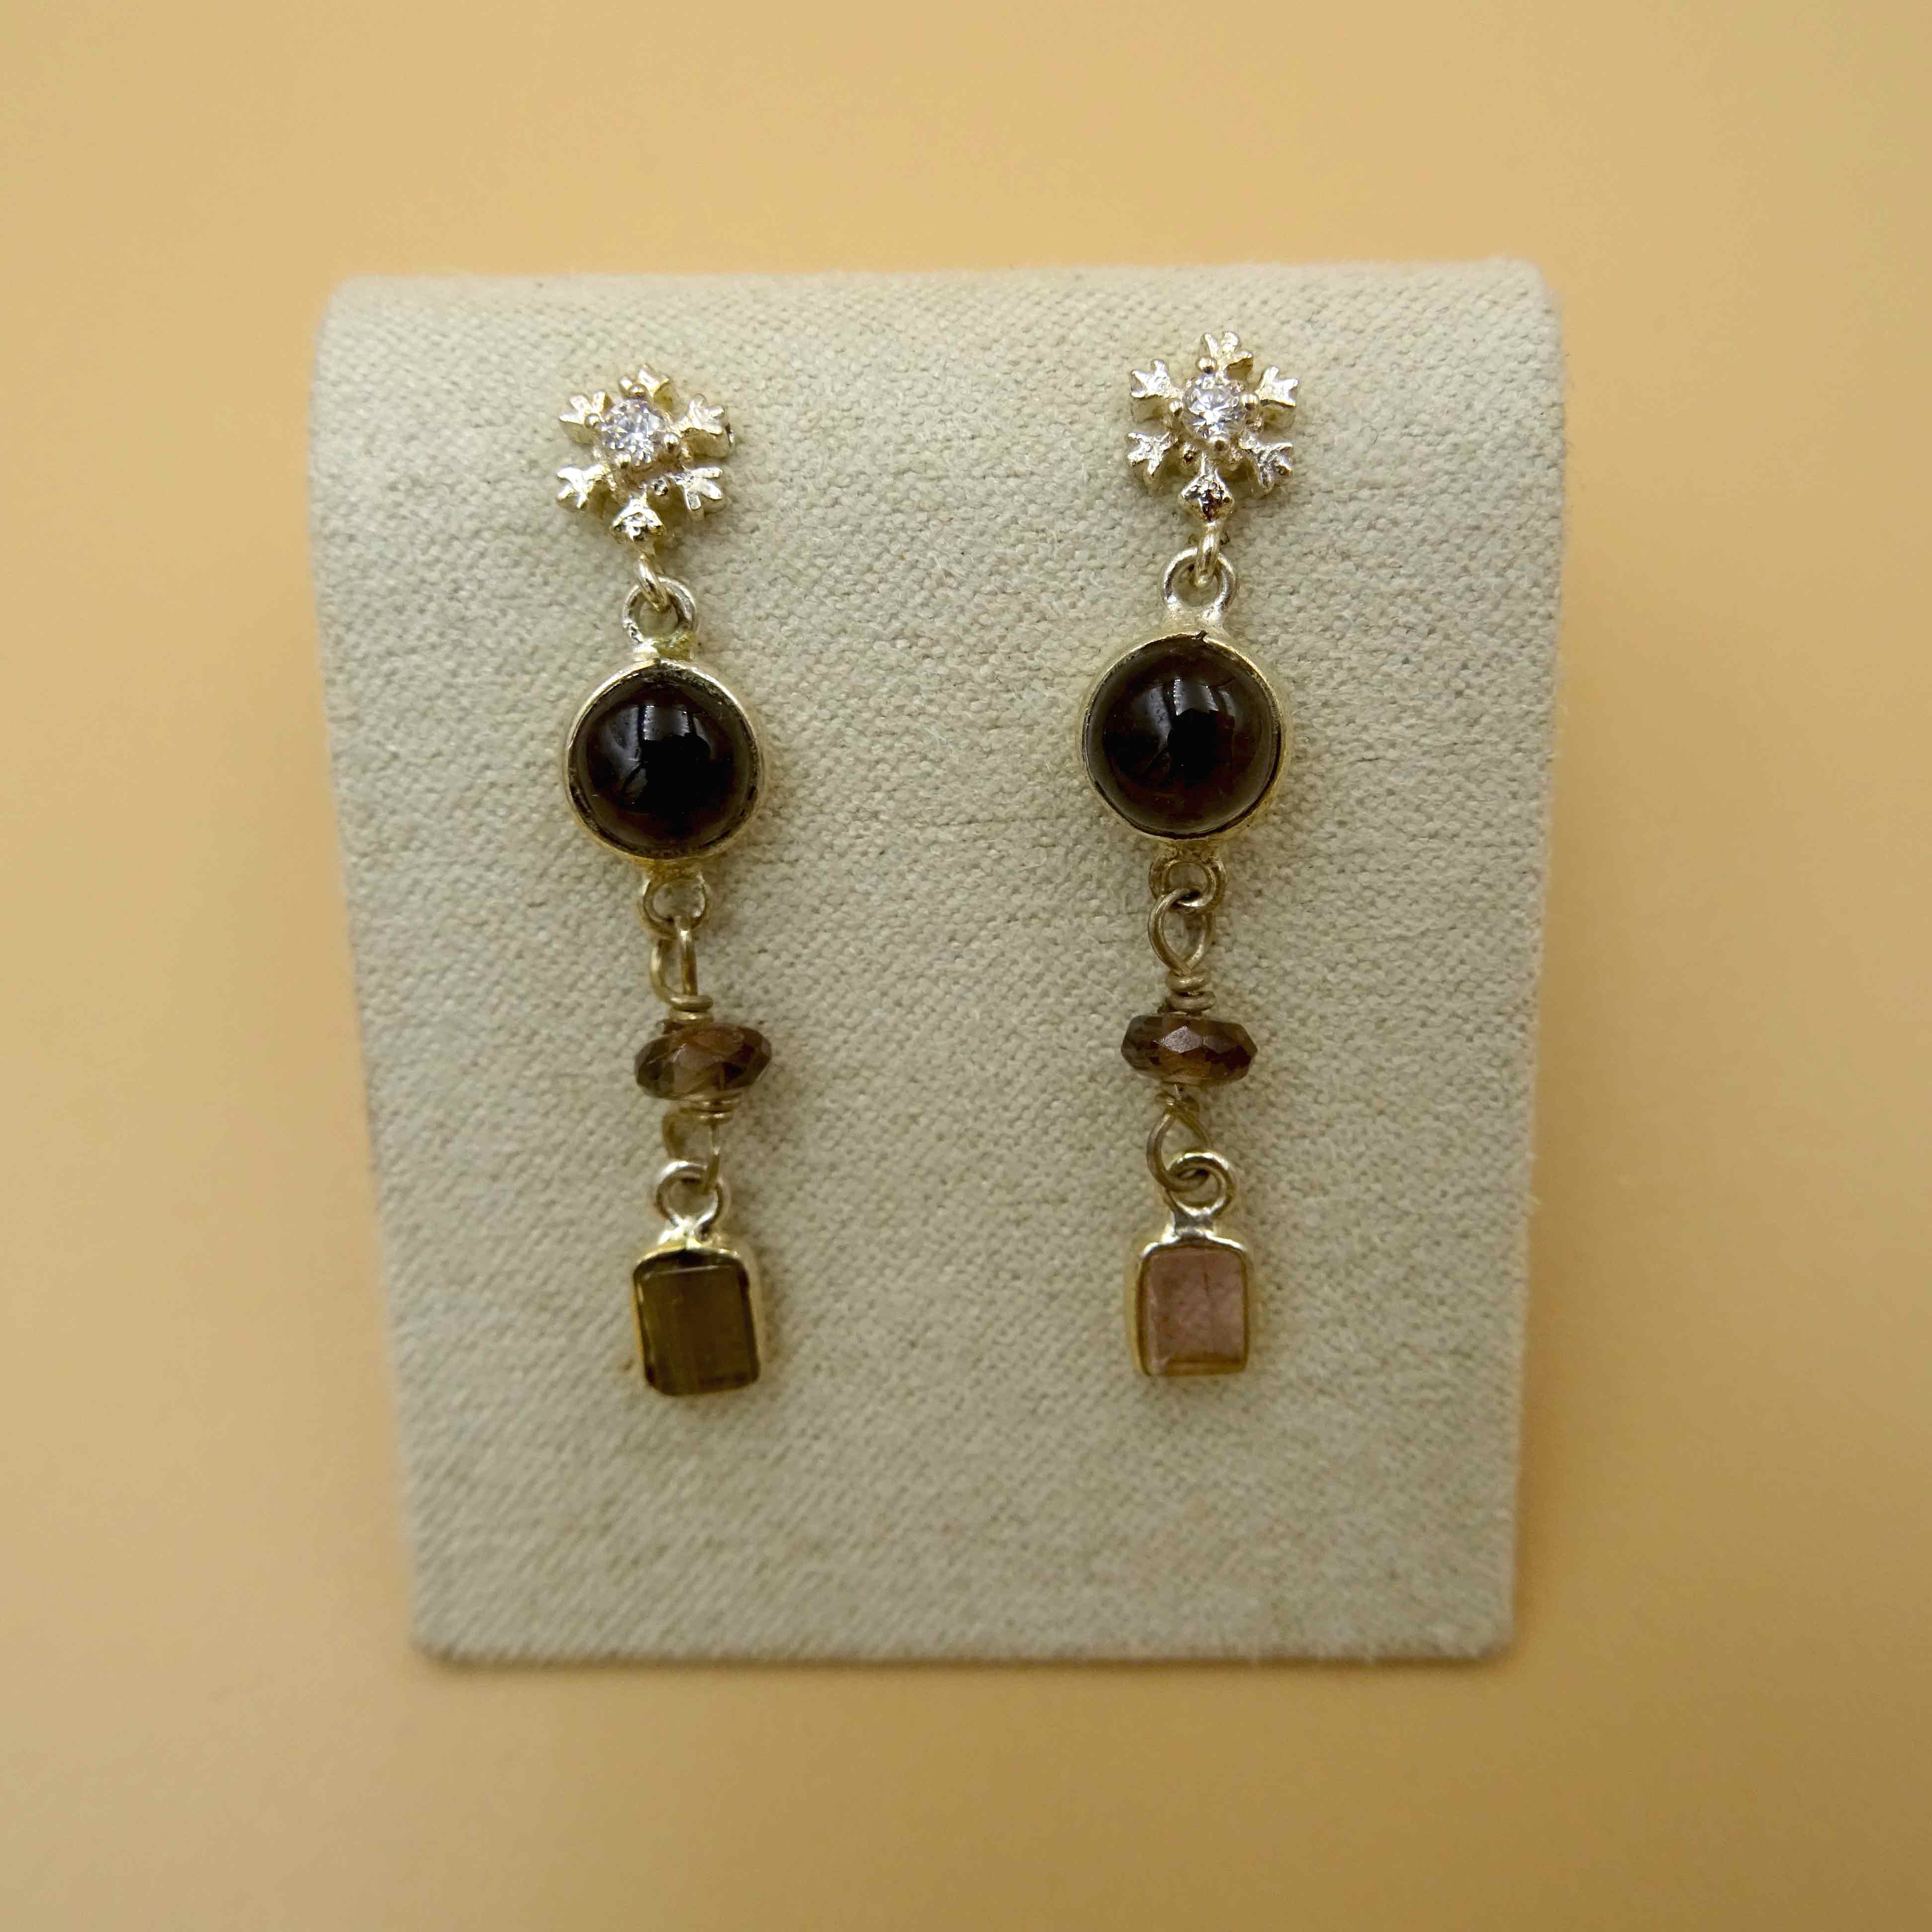 Snowflake Silver Earrings with Crystal, Smoky Quartz, and Tourmaline